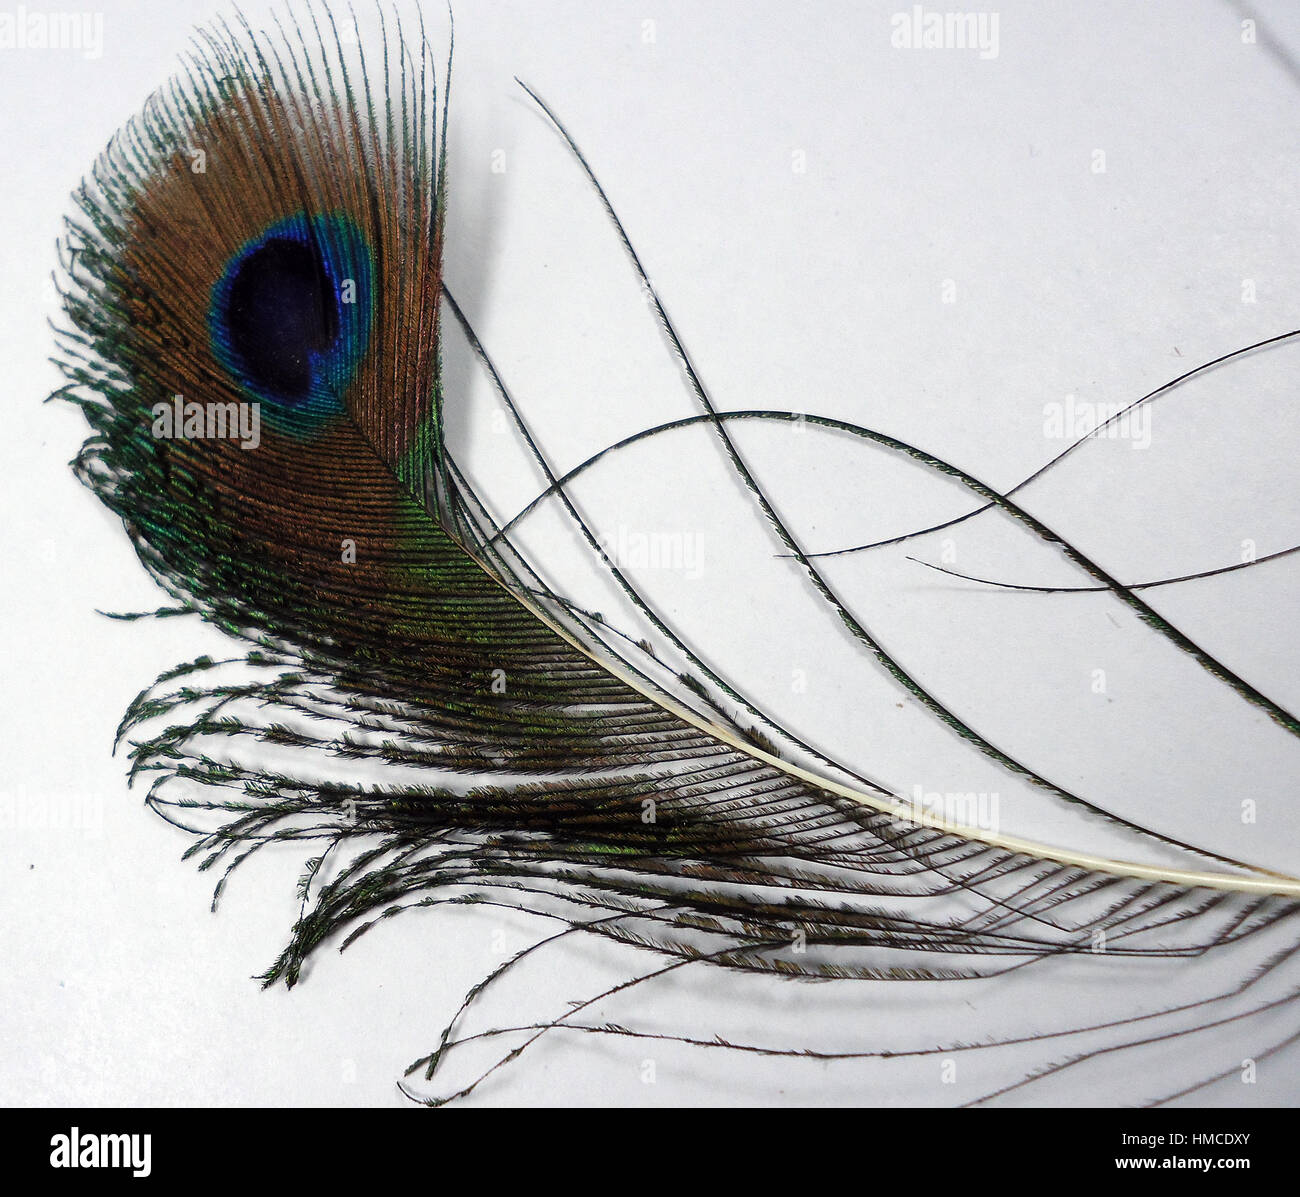 Feathers of Peacock also known as Indian Peafowl of Blue peafowl native to India and Shri Lanka, Scientifically known as Pavo cristatus. Stock Photo